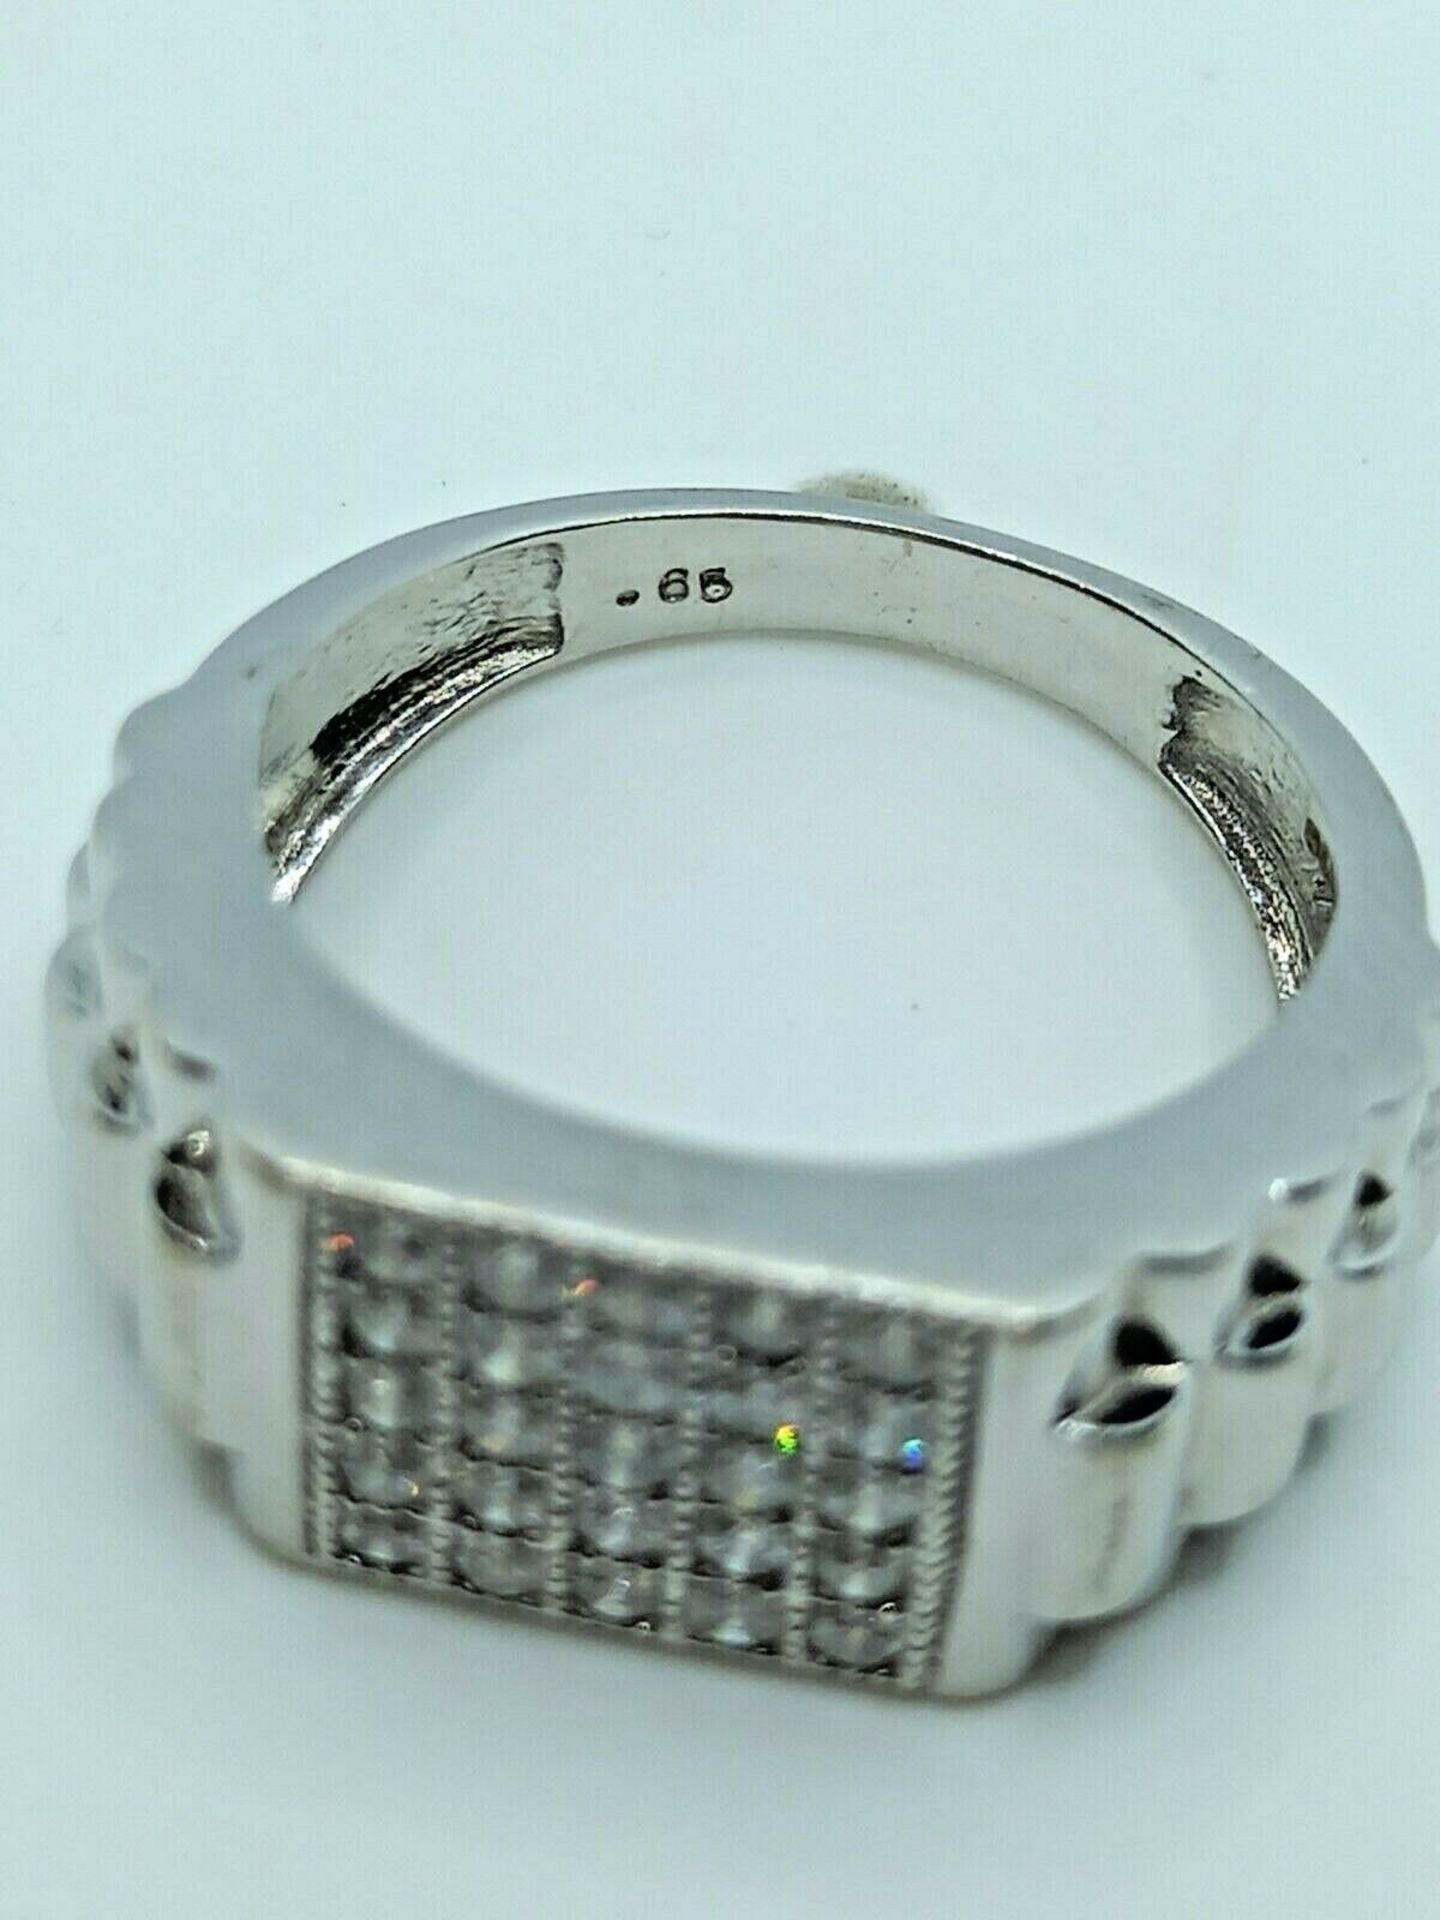 GENTS DIAMOND RING SOLID WHITE GOLD MEN'S ENGAGEMENT/WEDDING/DRESS - Image 3 of 4